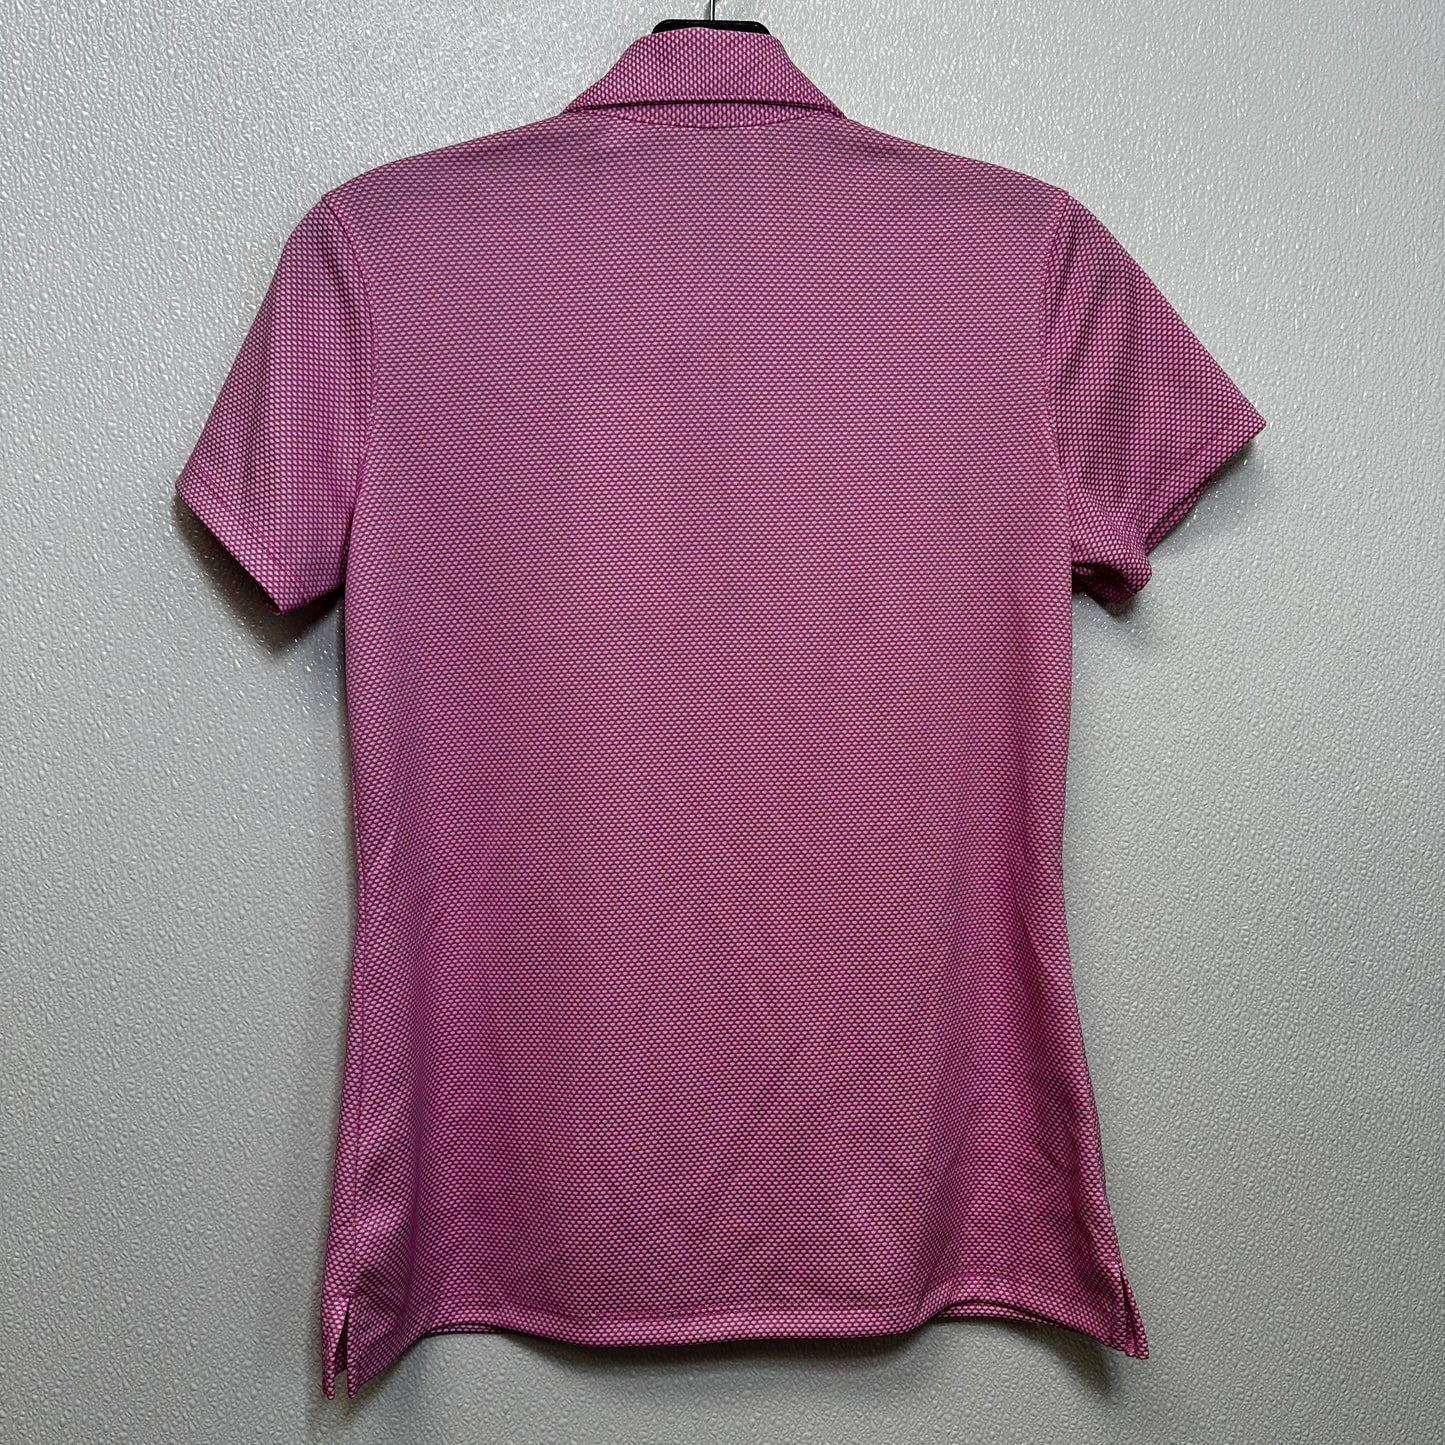 Pink Athletic Top Short Sleeve Clothes Mentor, Size S